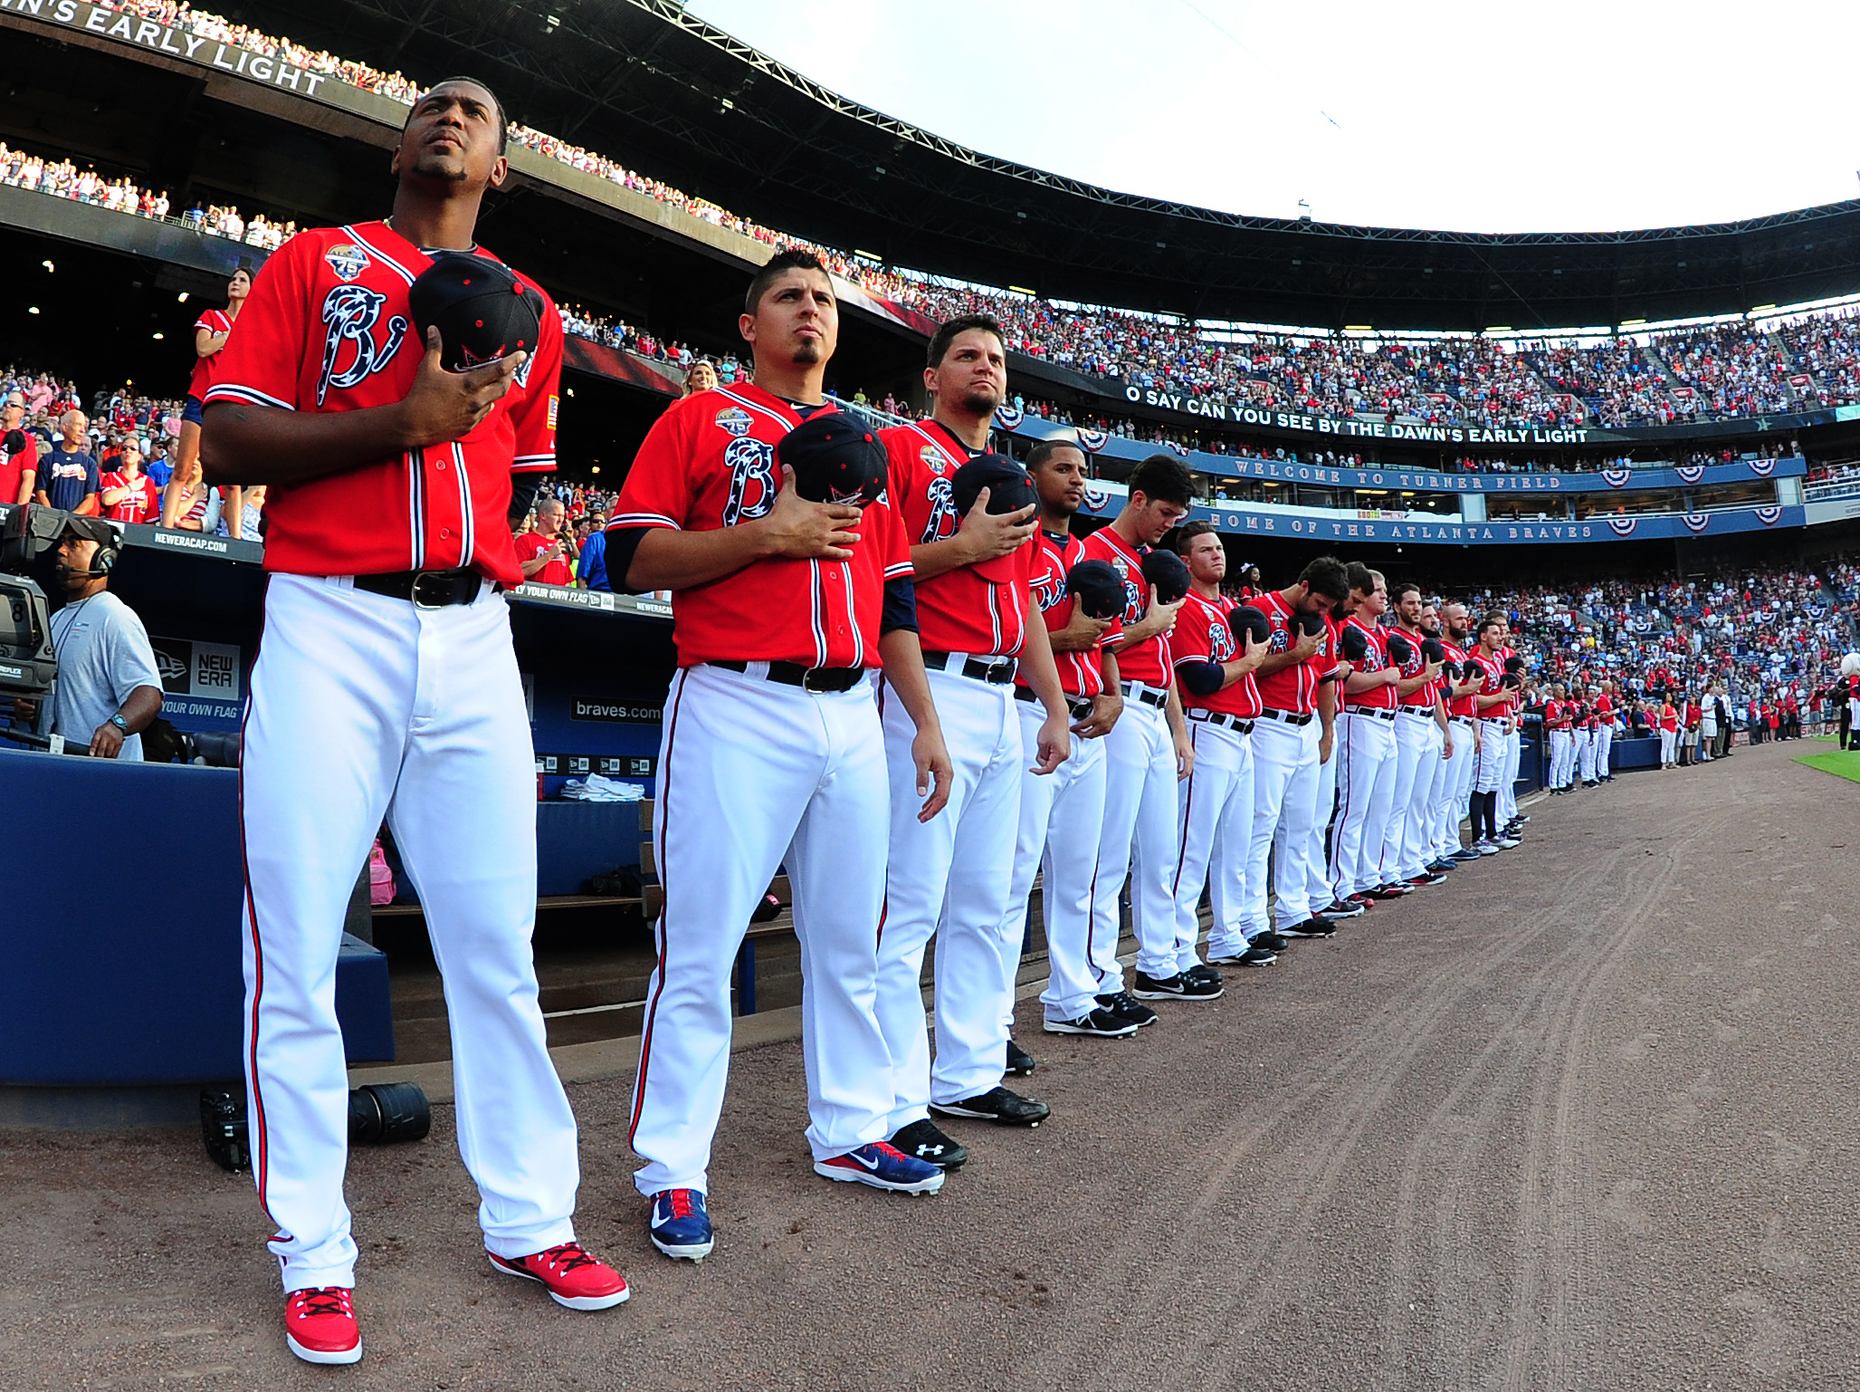 How soon can the Atlanta Braves clinch home field advantage in the